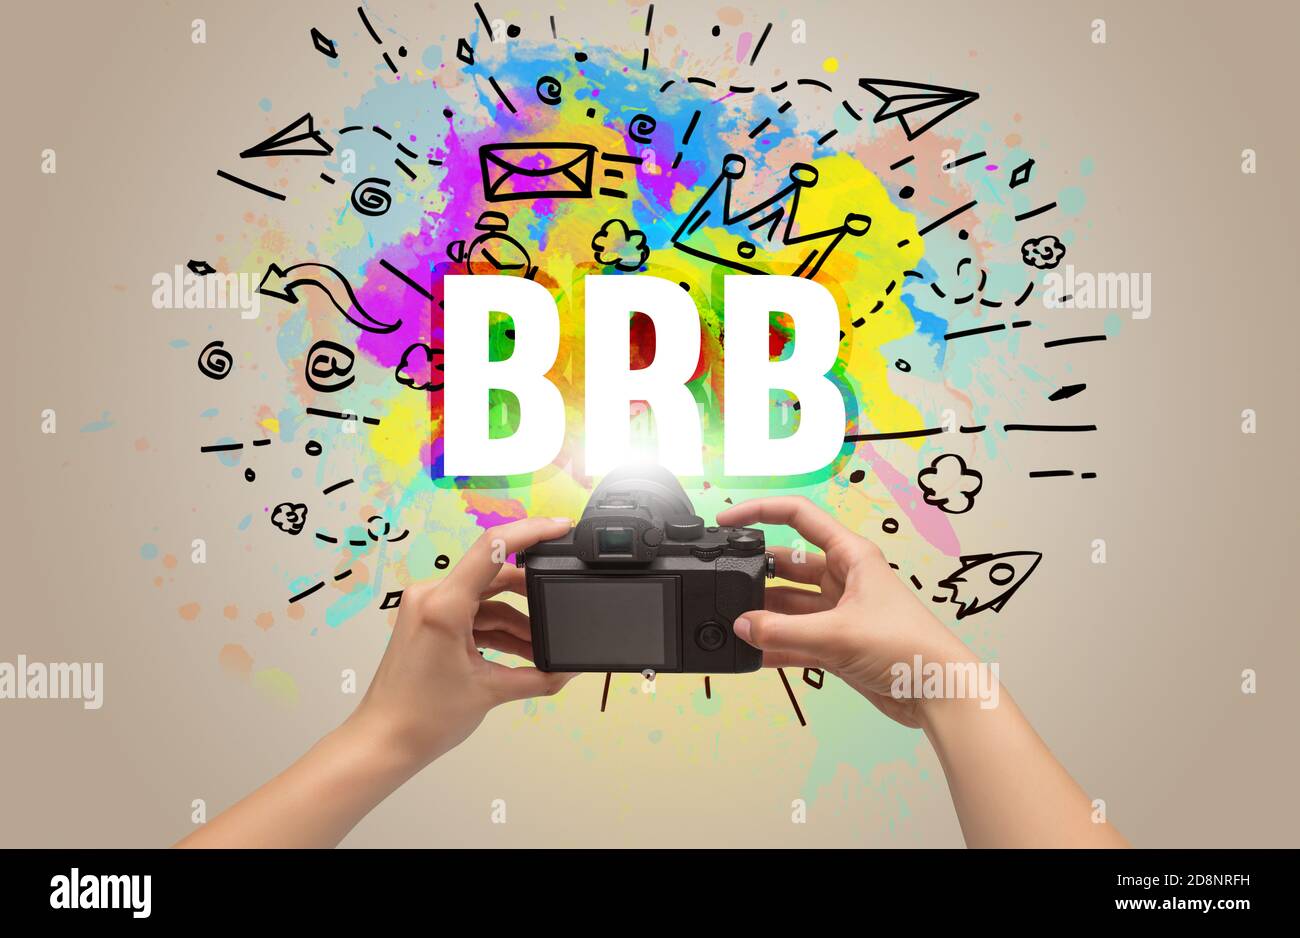 Close-up of a hand holding digital camera with abstract drawing and BRB inscription Stock Photo